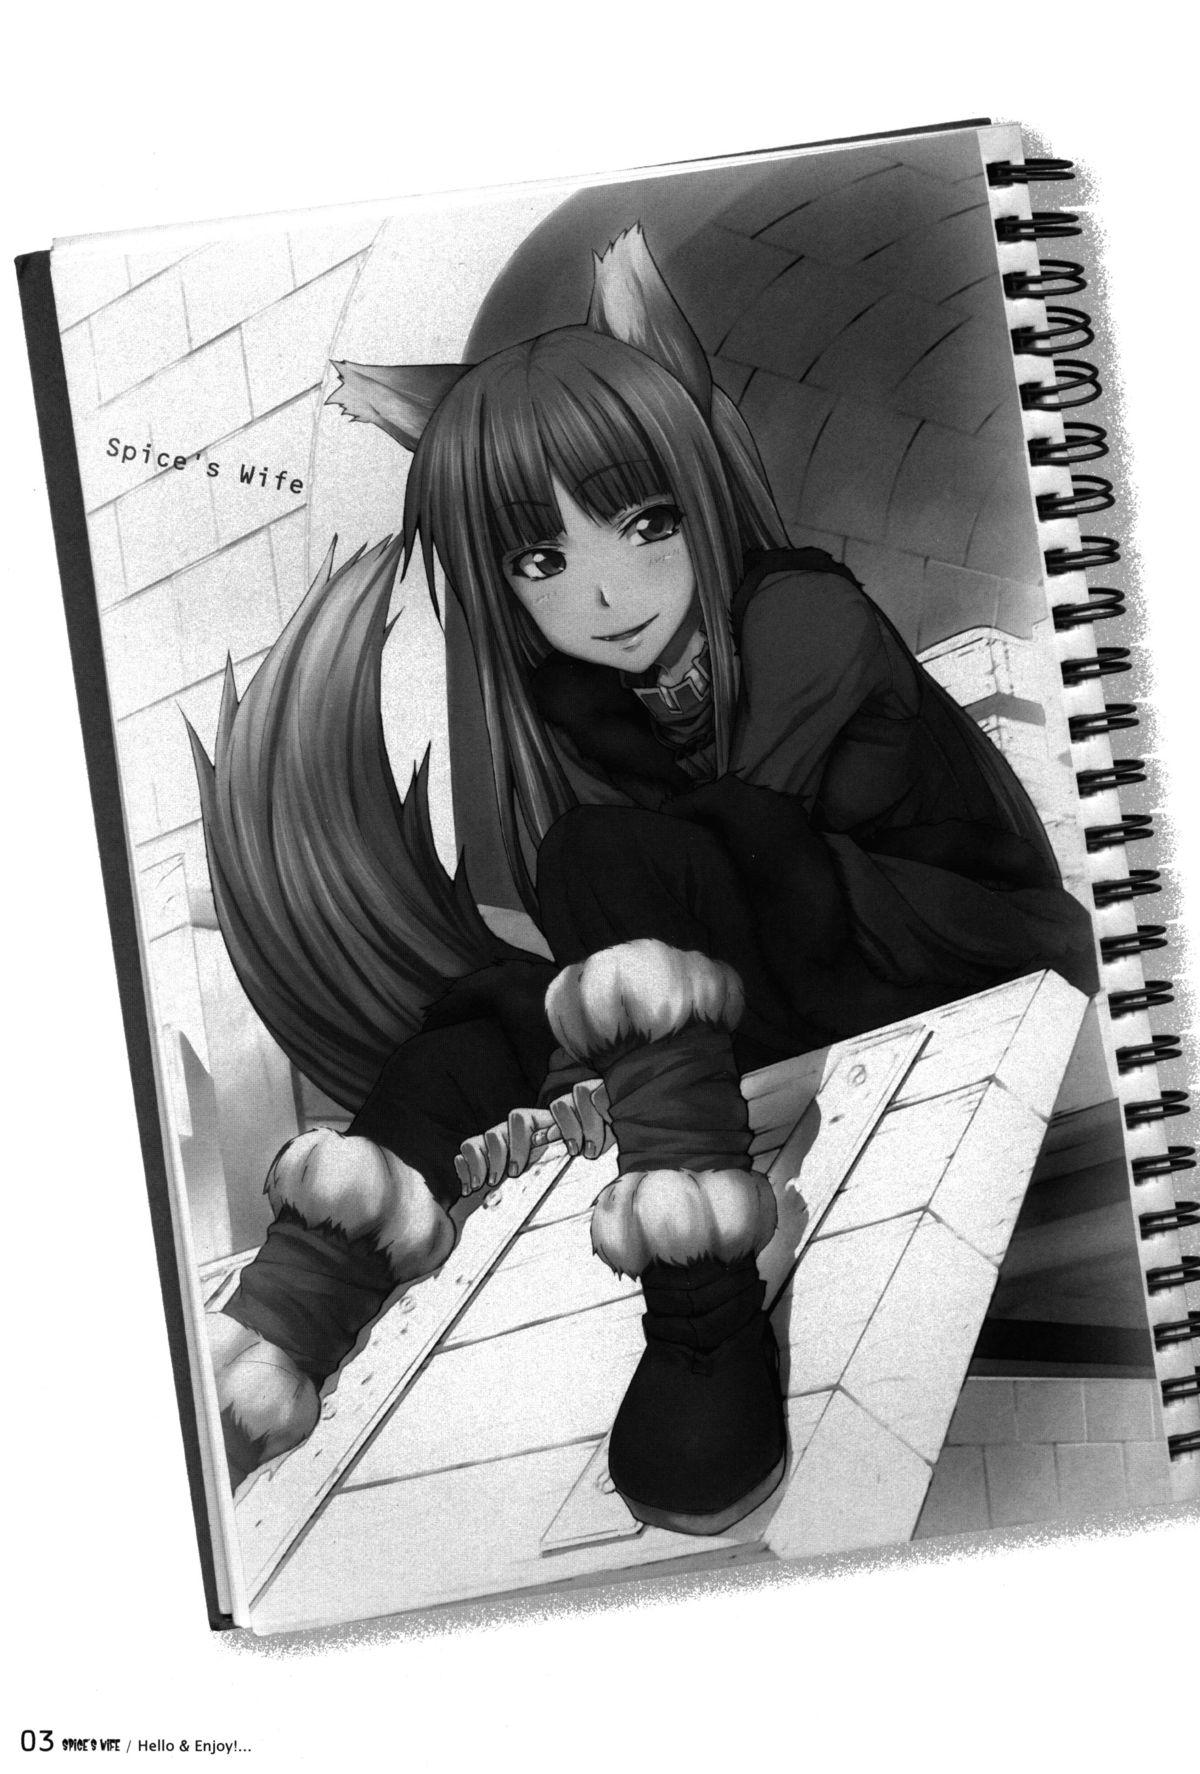 Cocksucker SPiCE'S WiFE - Spice and wolf High - Page 3